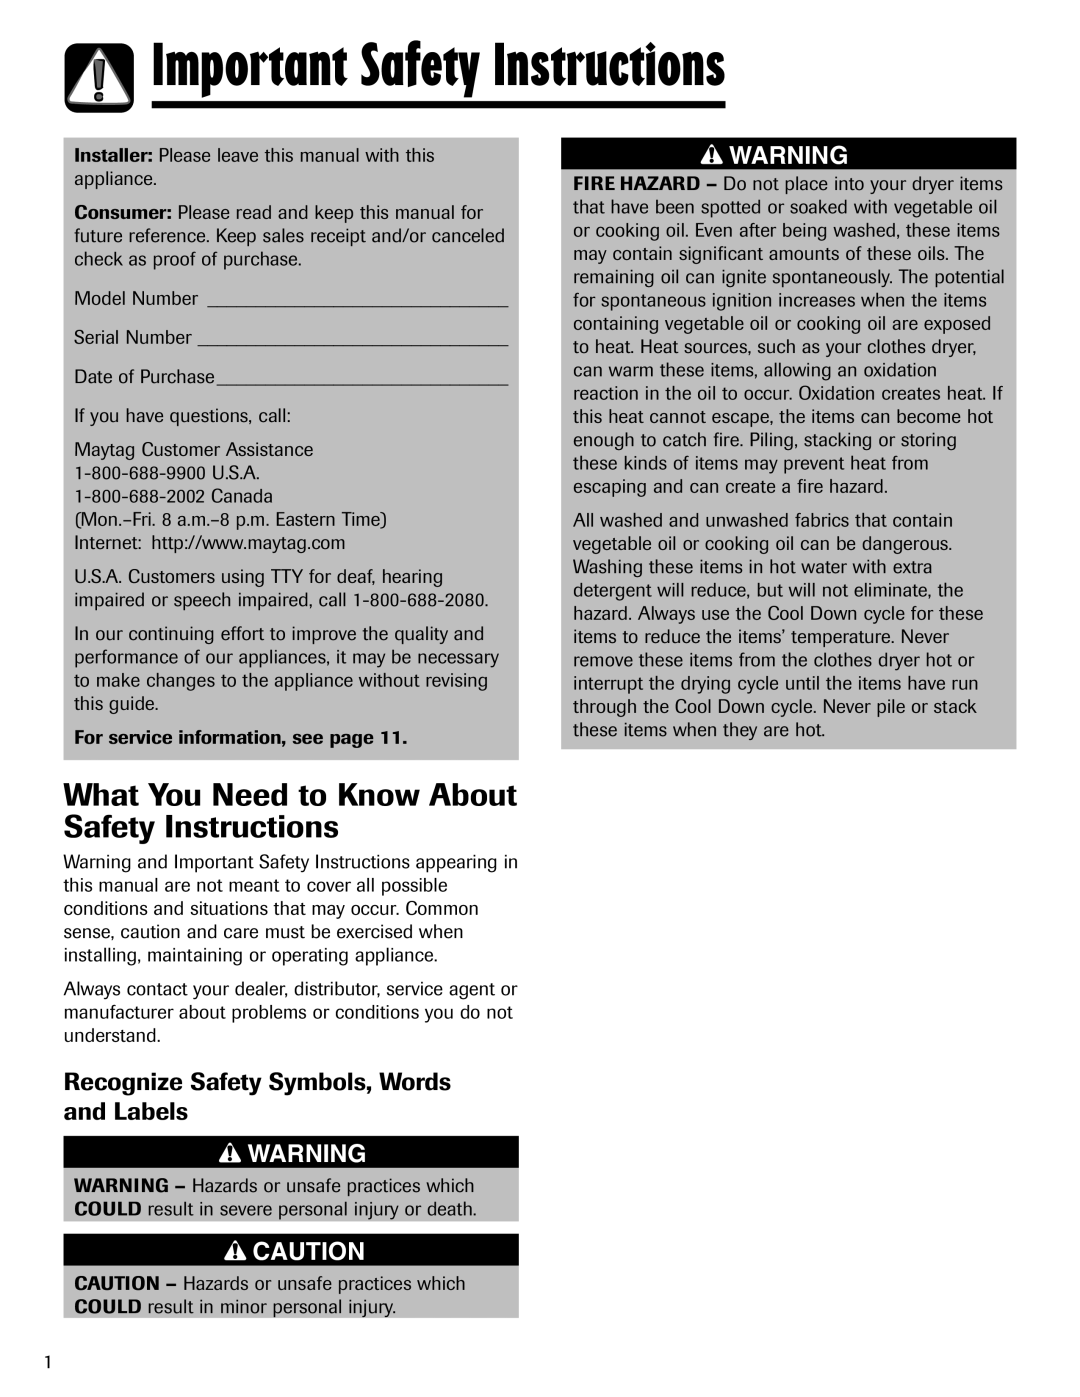 Maytag MD-24 Important Safety Instructions, What You Need to Know About Safety Instructions, Canada 